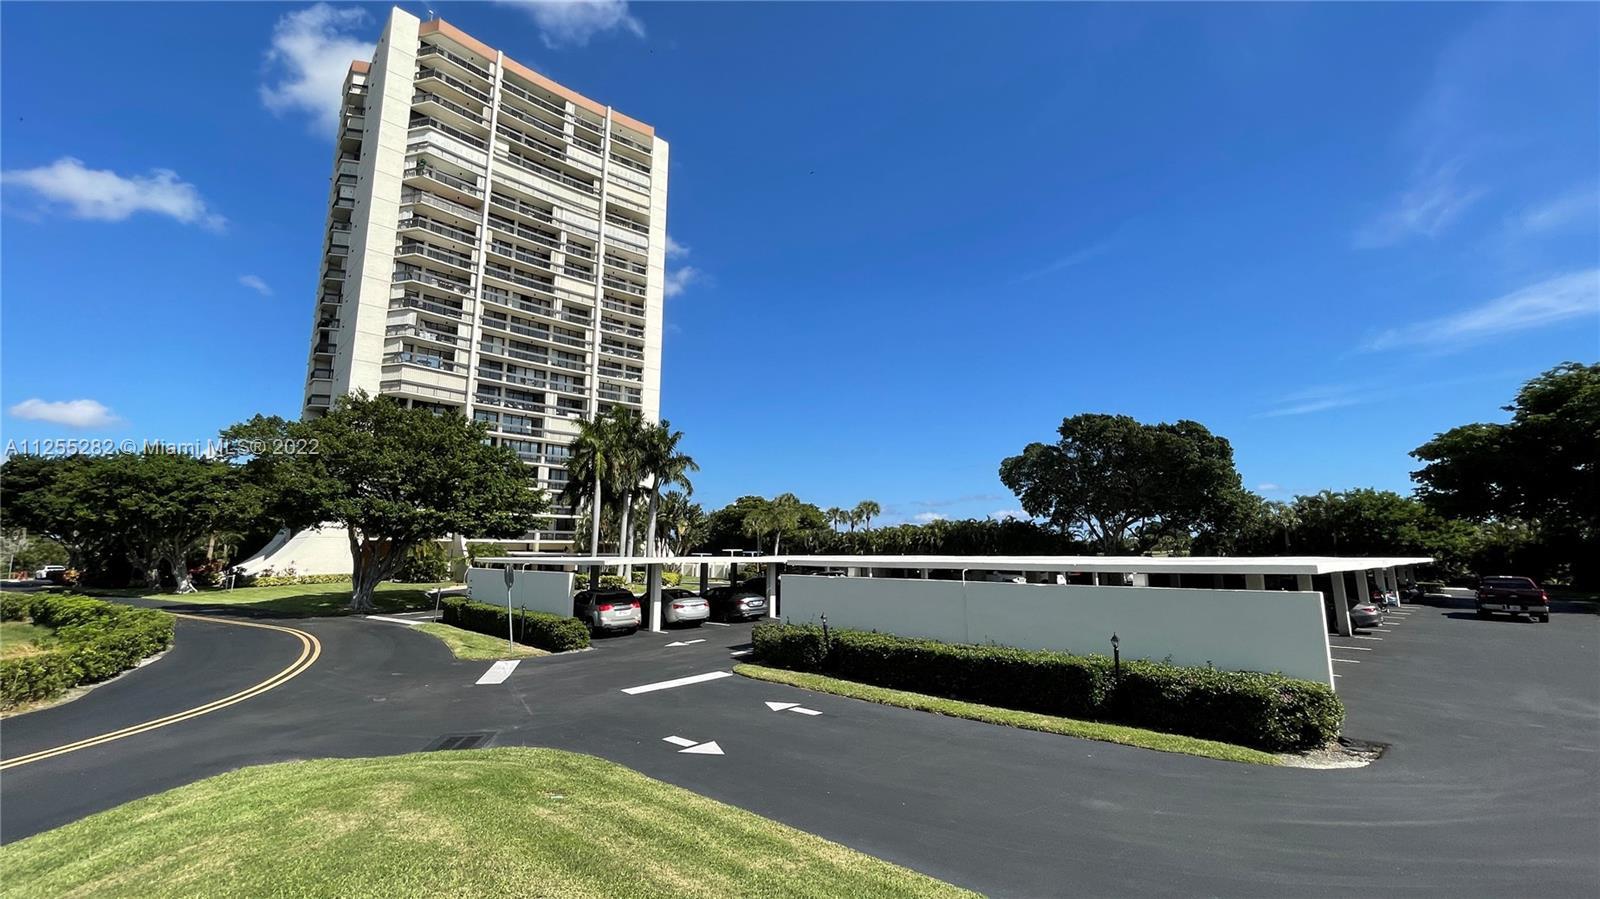 JUST REDUCED!!! Updated spacious 2/2 on the 10th floor of a highrise building with a doorman, pool, 